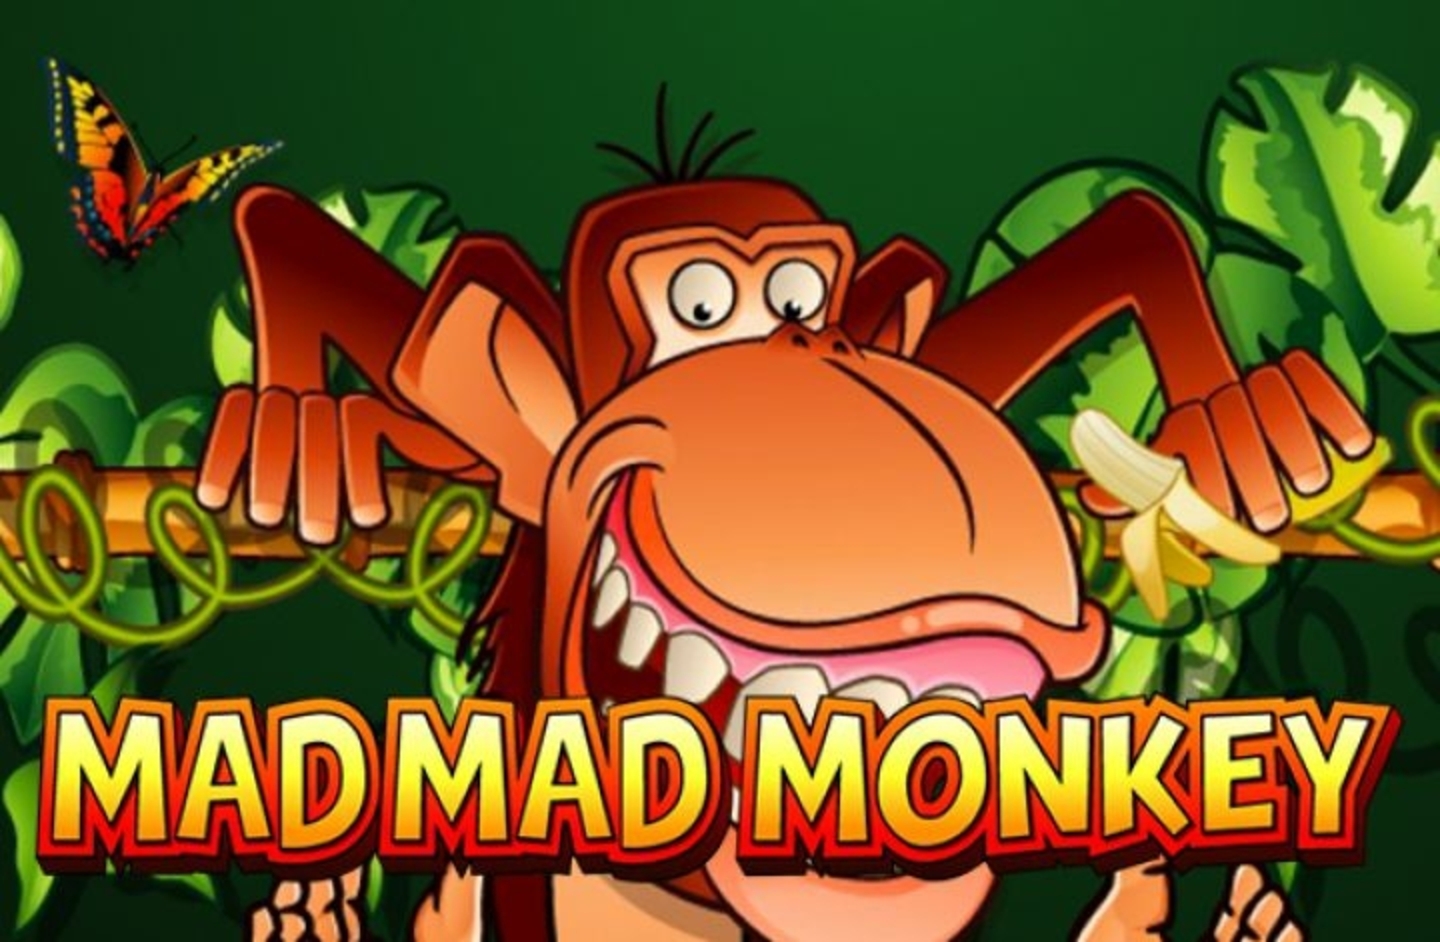 The Mad Mad Monkey Online Slot Demo Game by NextGen Gaming